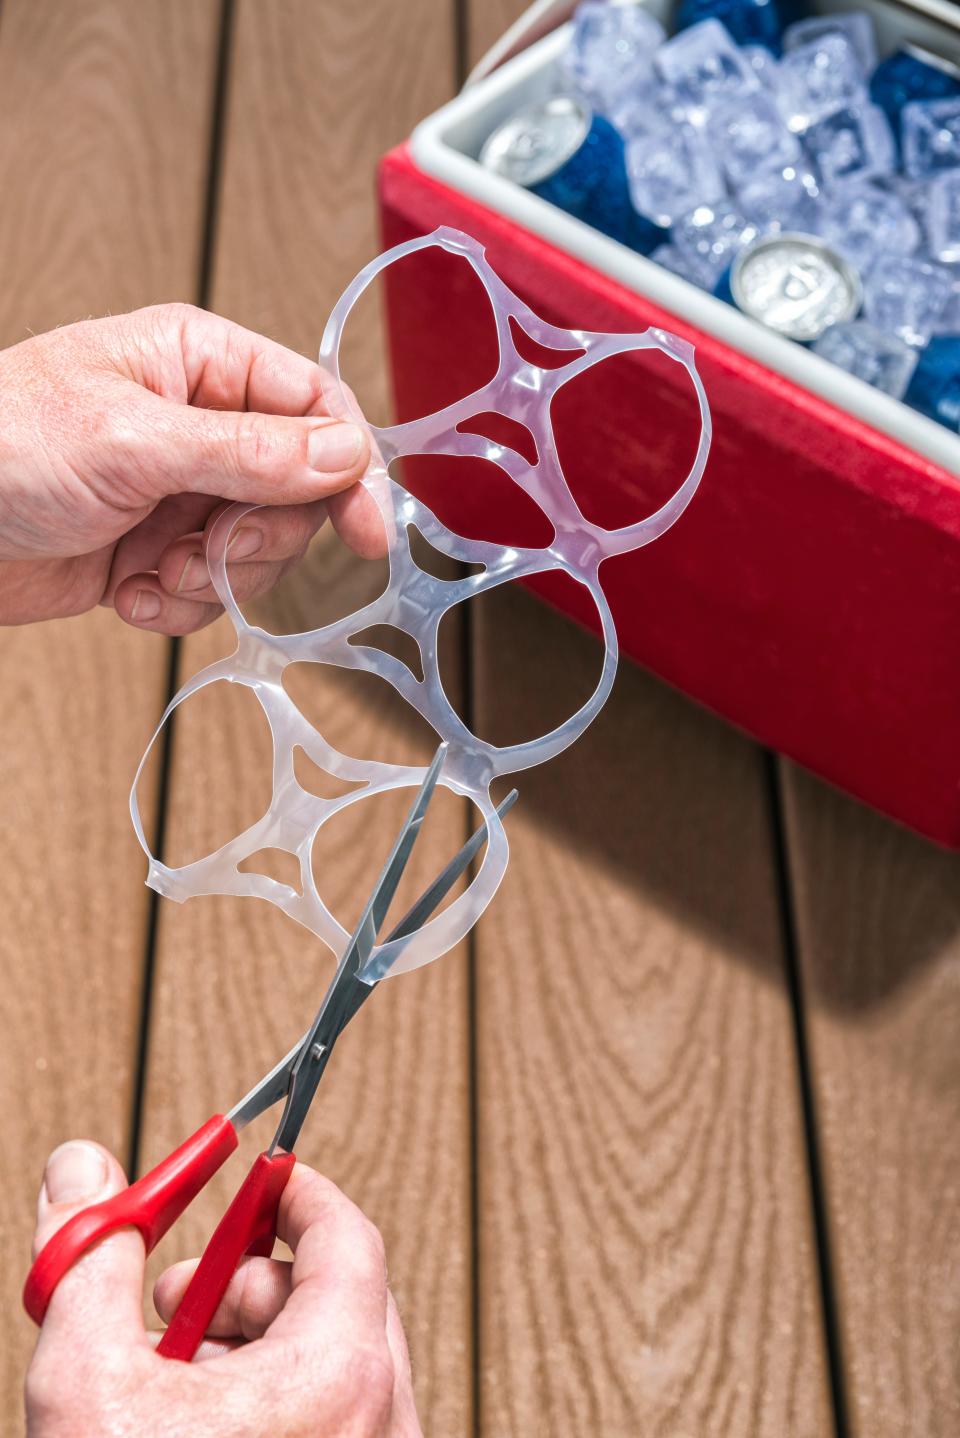 The Delaware General Assembly recently heard a bill that would prohibit the sale of beverages stored with plastic rings or plastic connectors like this one typically used to connect soda, beer and other beverages.